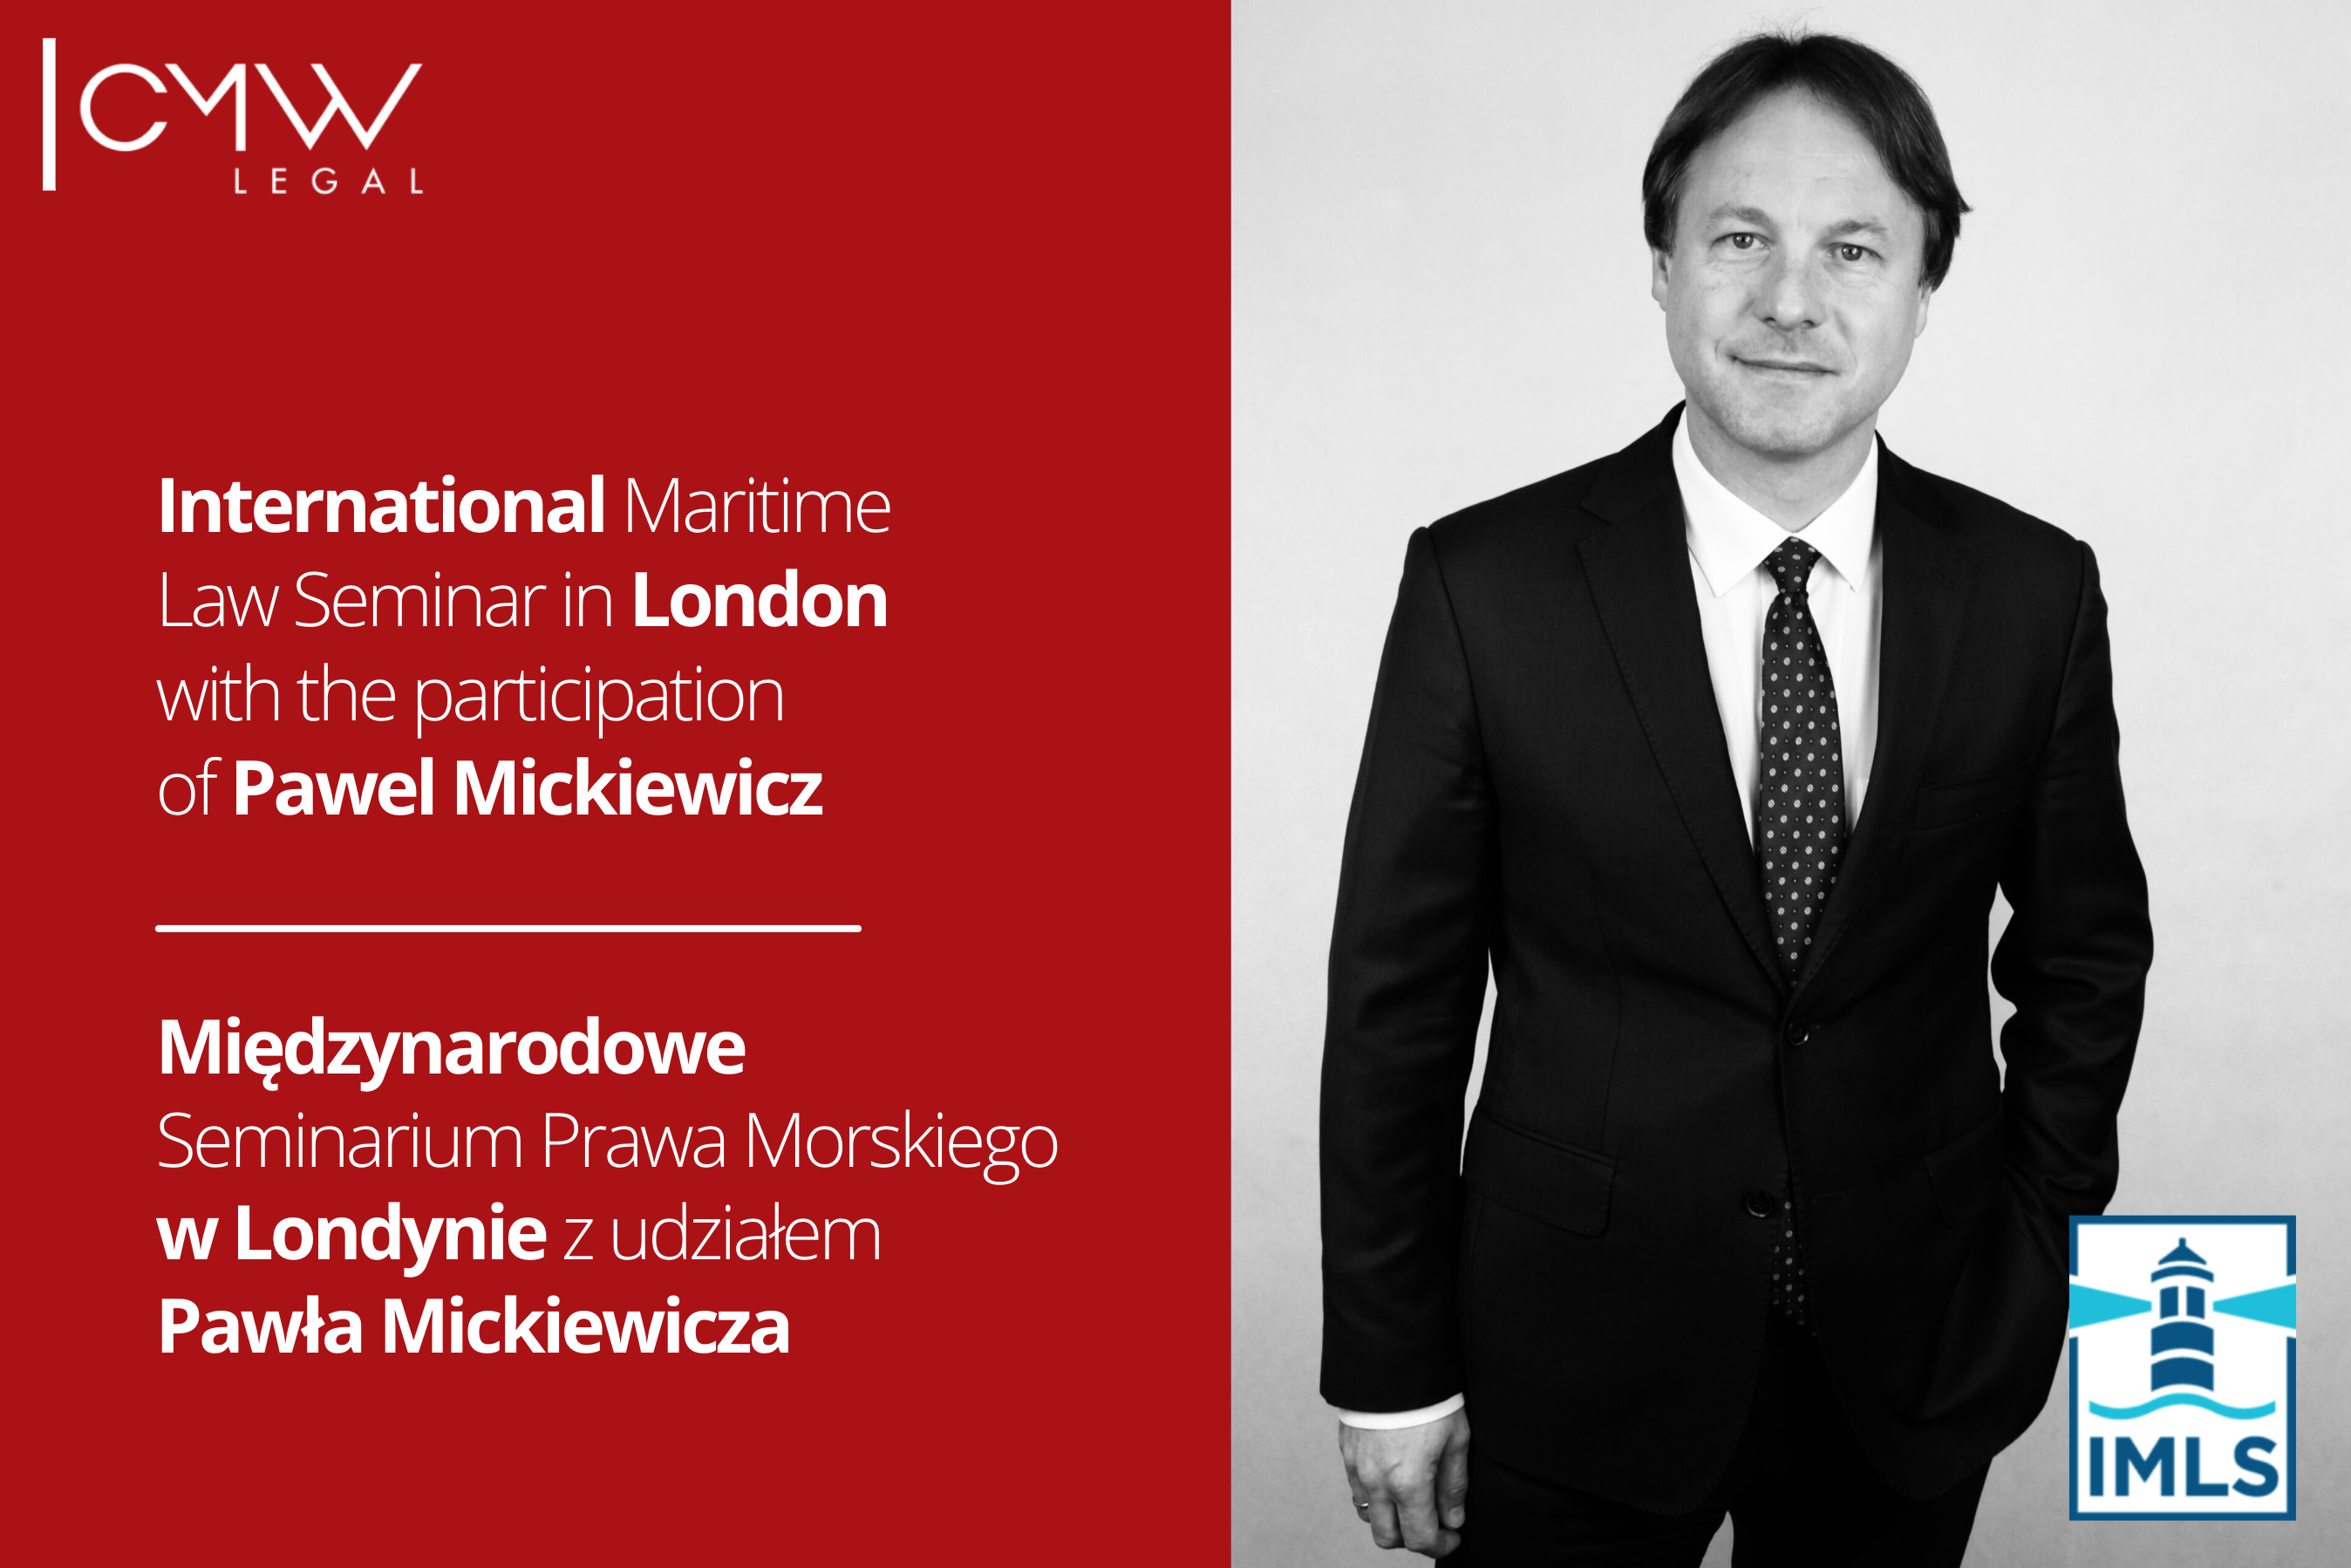  IMLS with the participation of Paweł Mickiewicz – this week in London, 6th October, 2022.